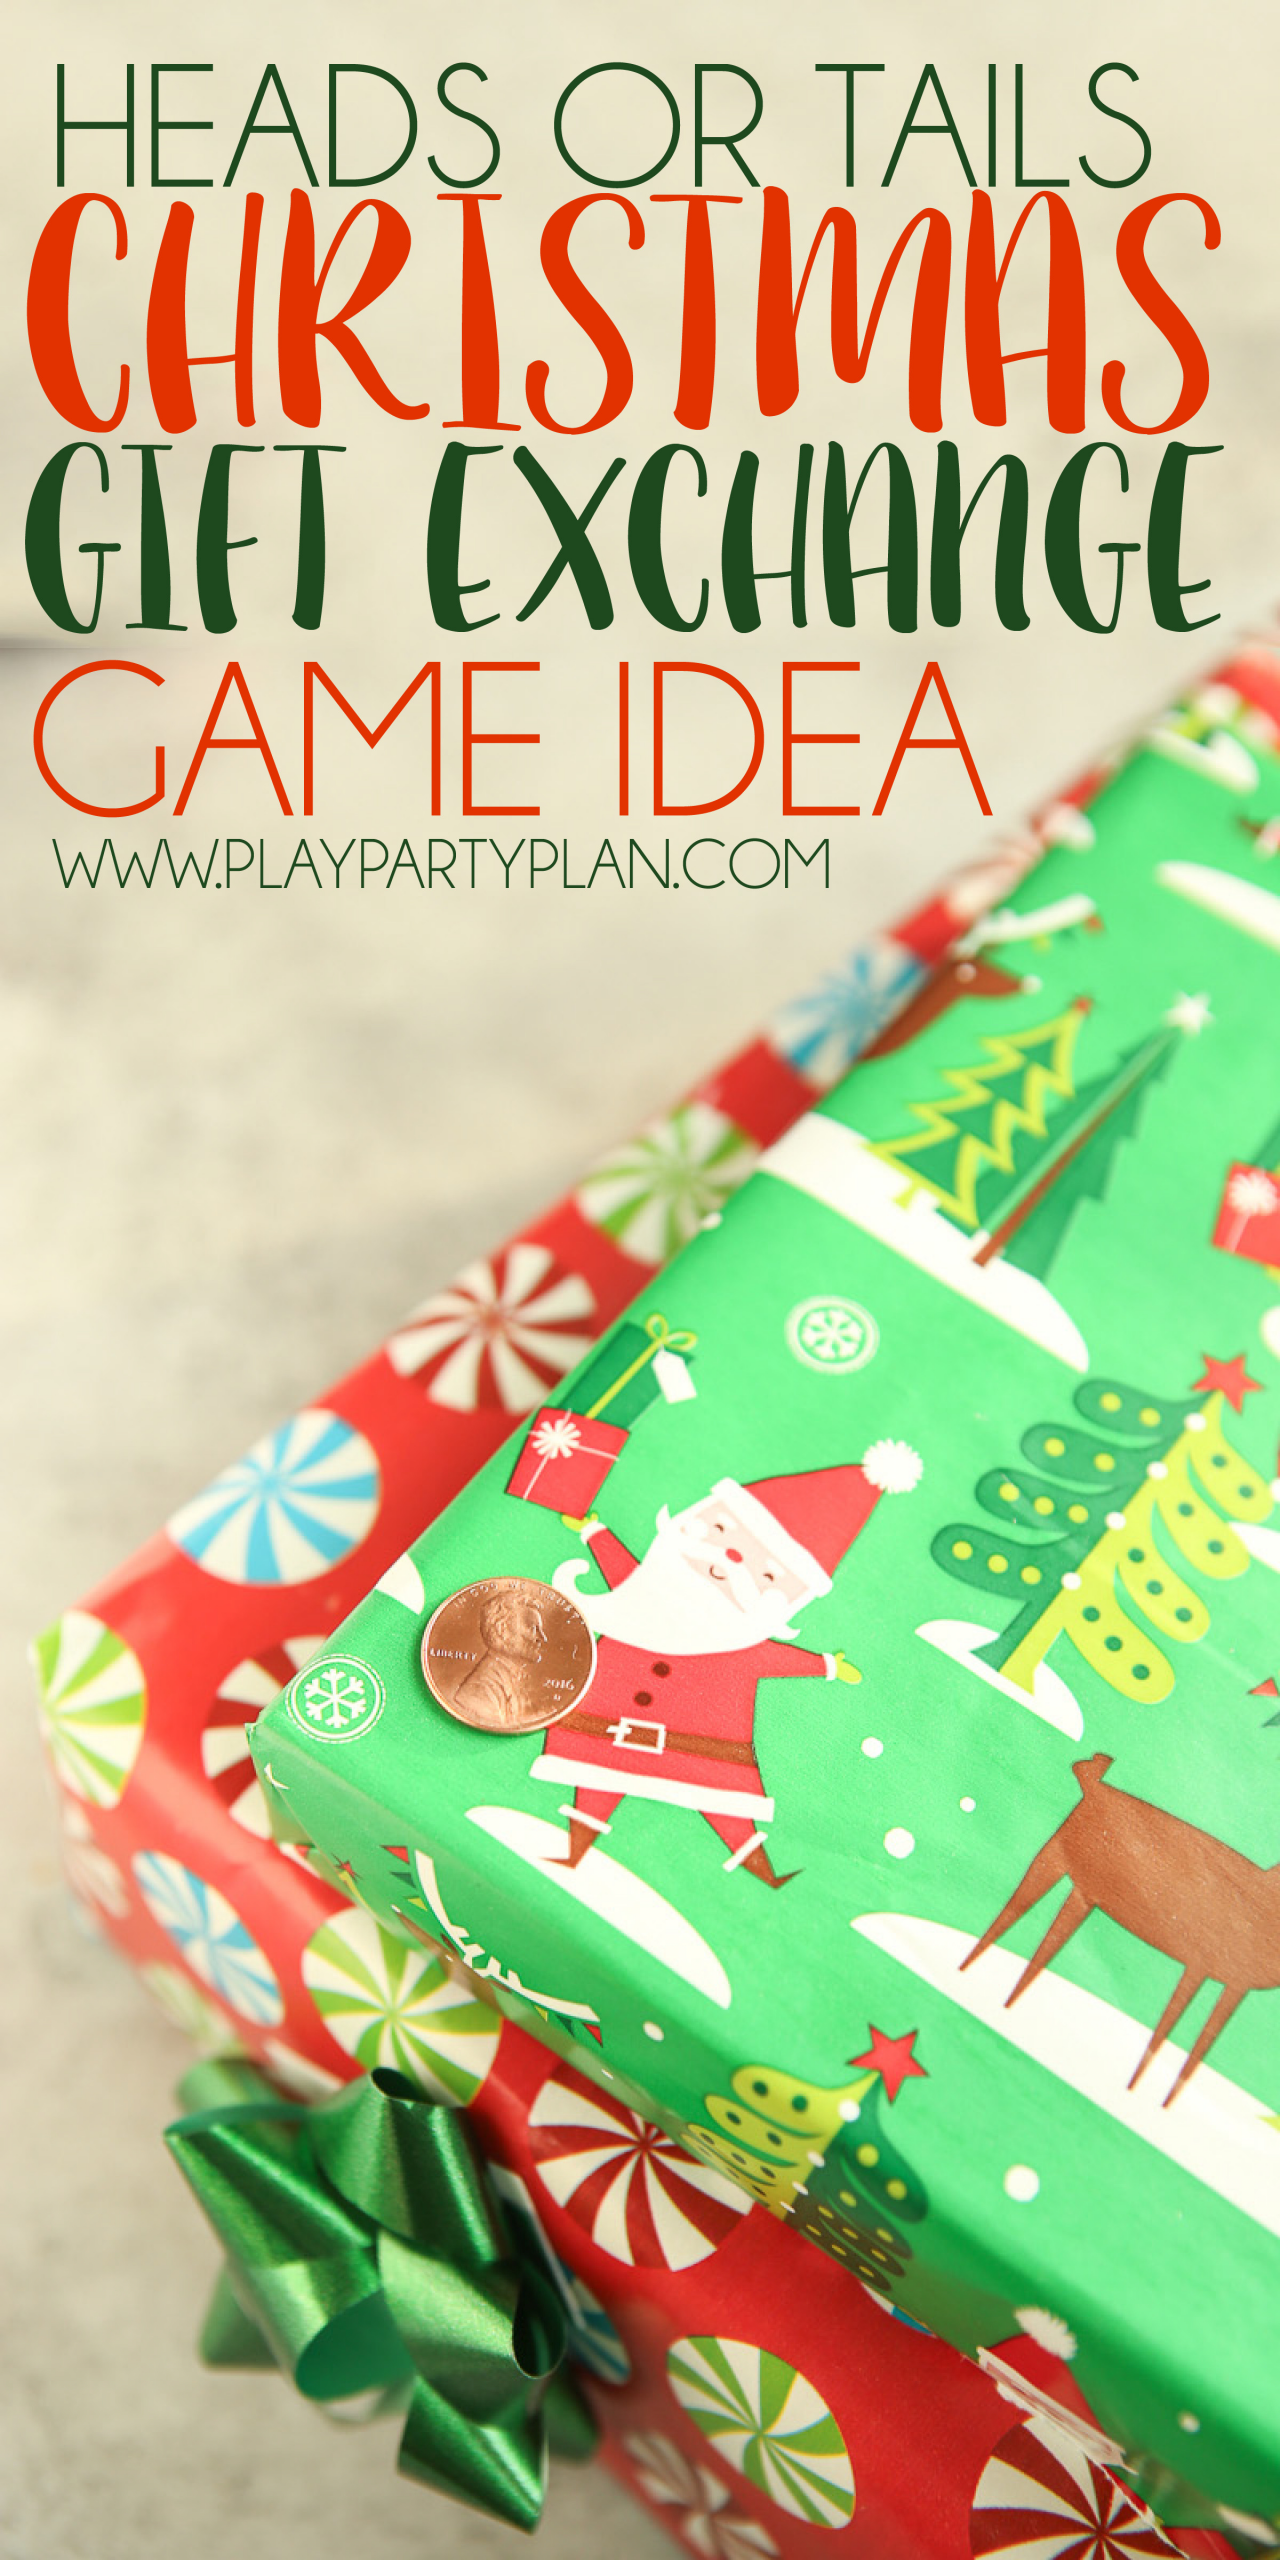 Enjoyable Office Christmas Party Games Ideas
 Heads or Tails White Elephant Gift Exchange Game